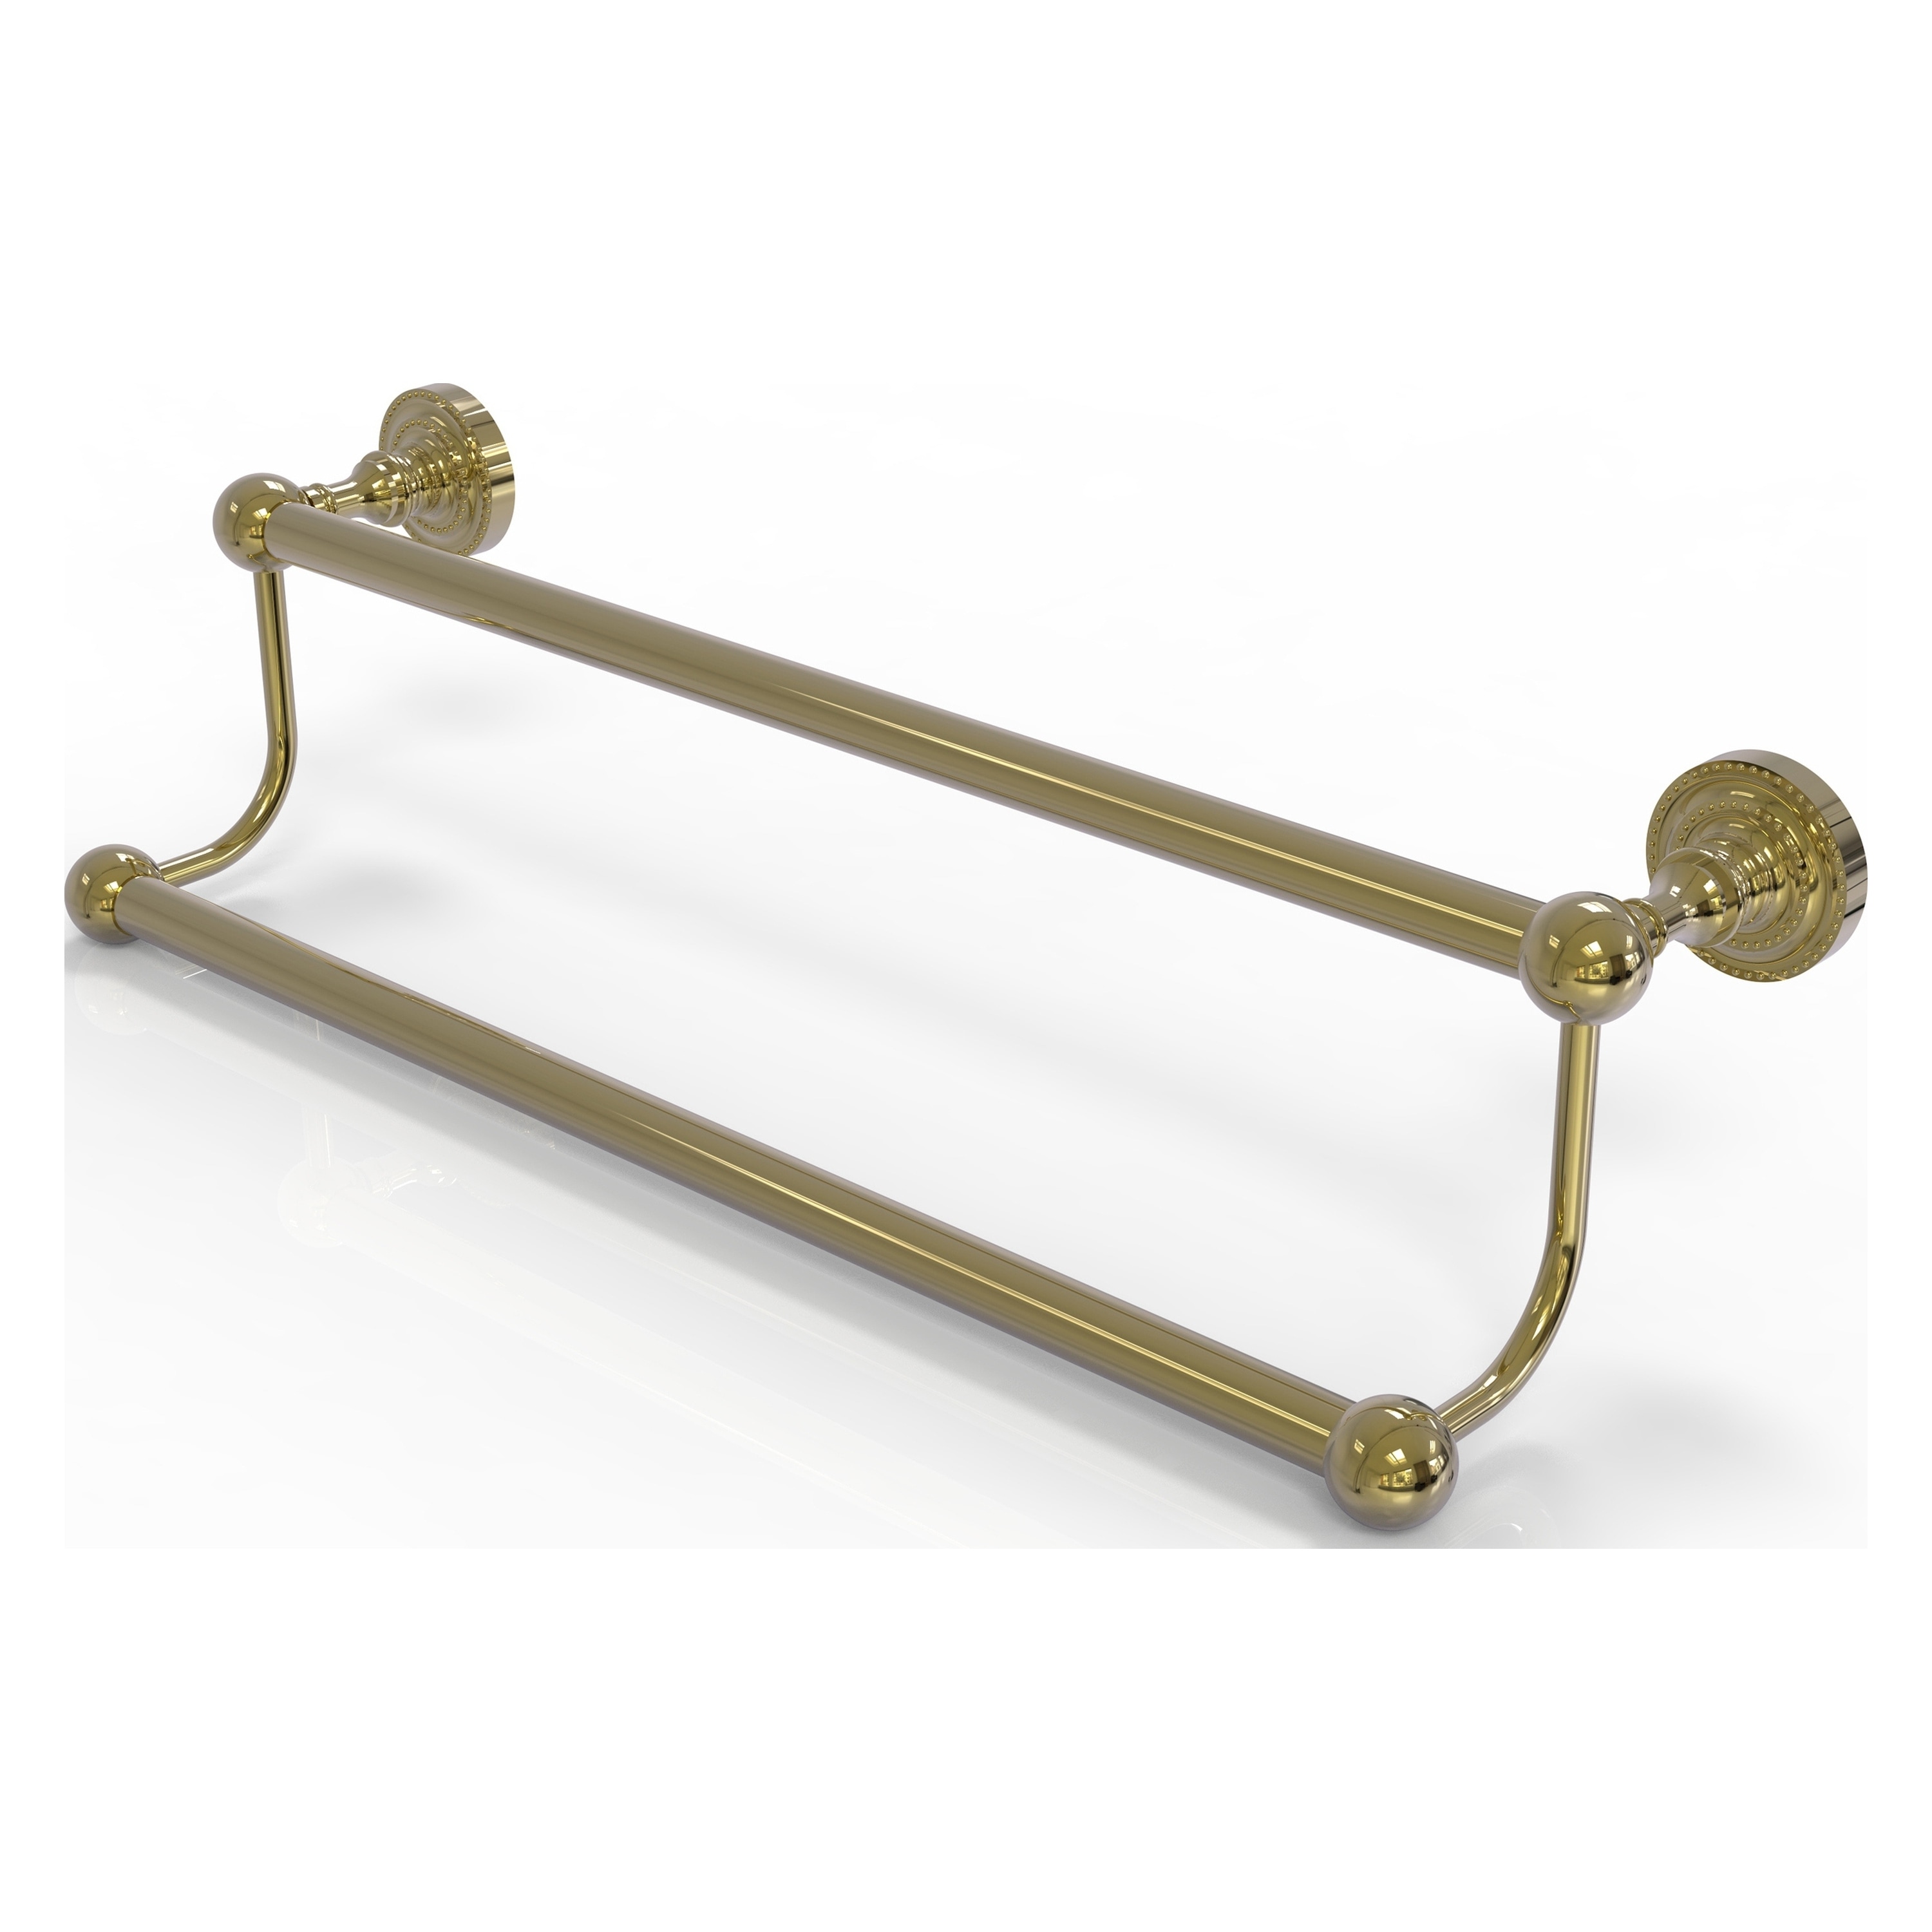 24 Inch Antique Brass Single/ Double Decorative Towel Bar Wall